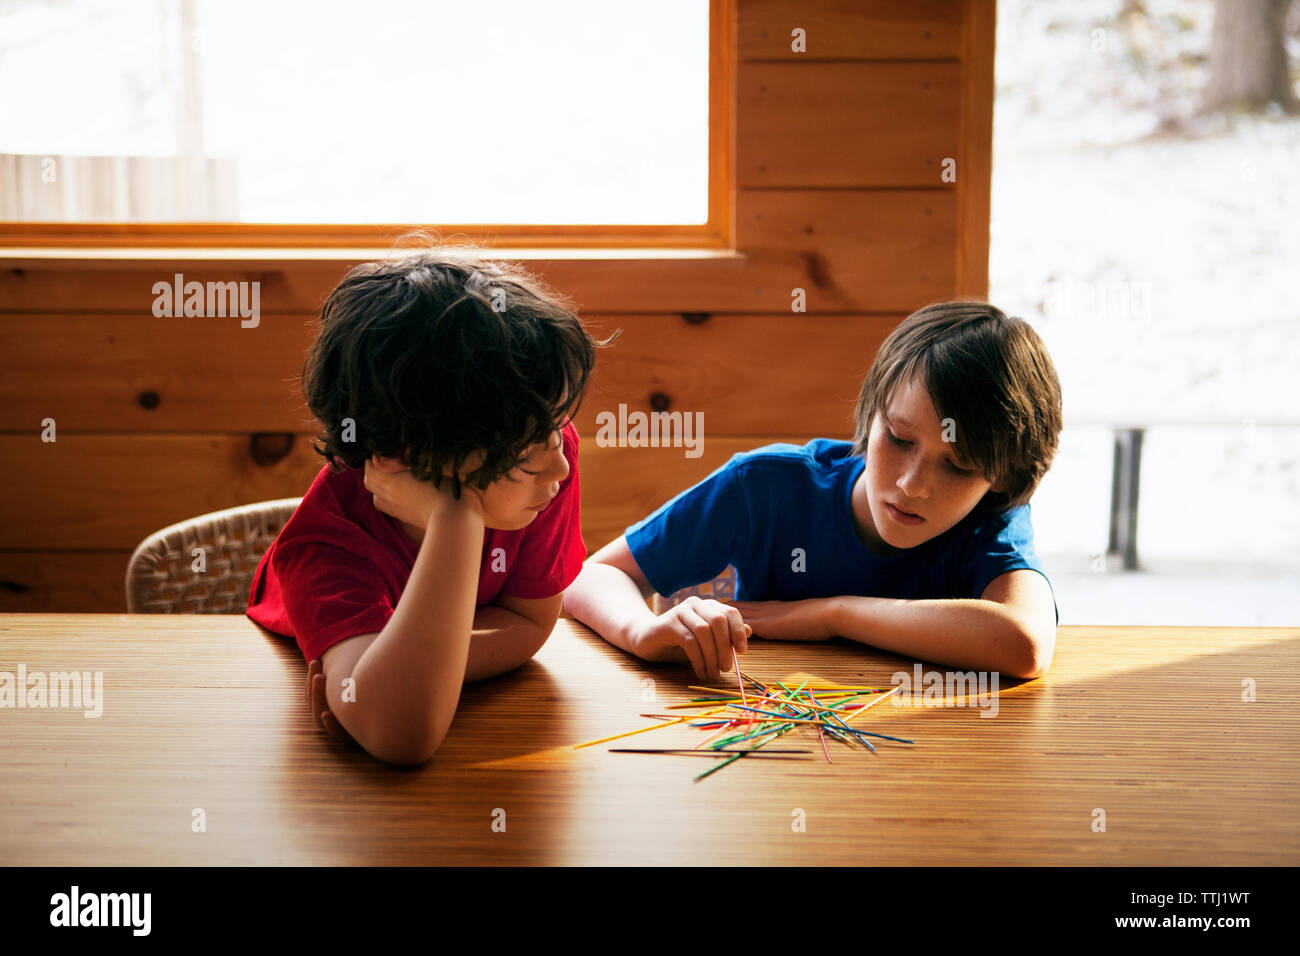 Brothers playing pick up sticks at table in home Stock Photo